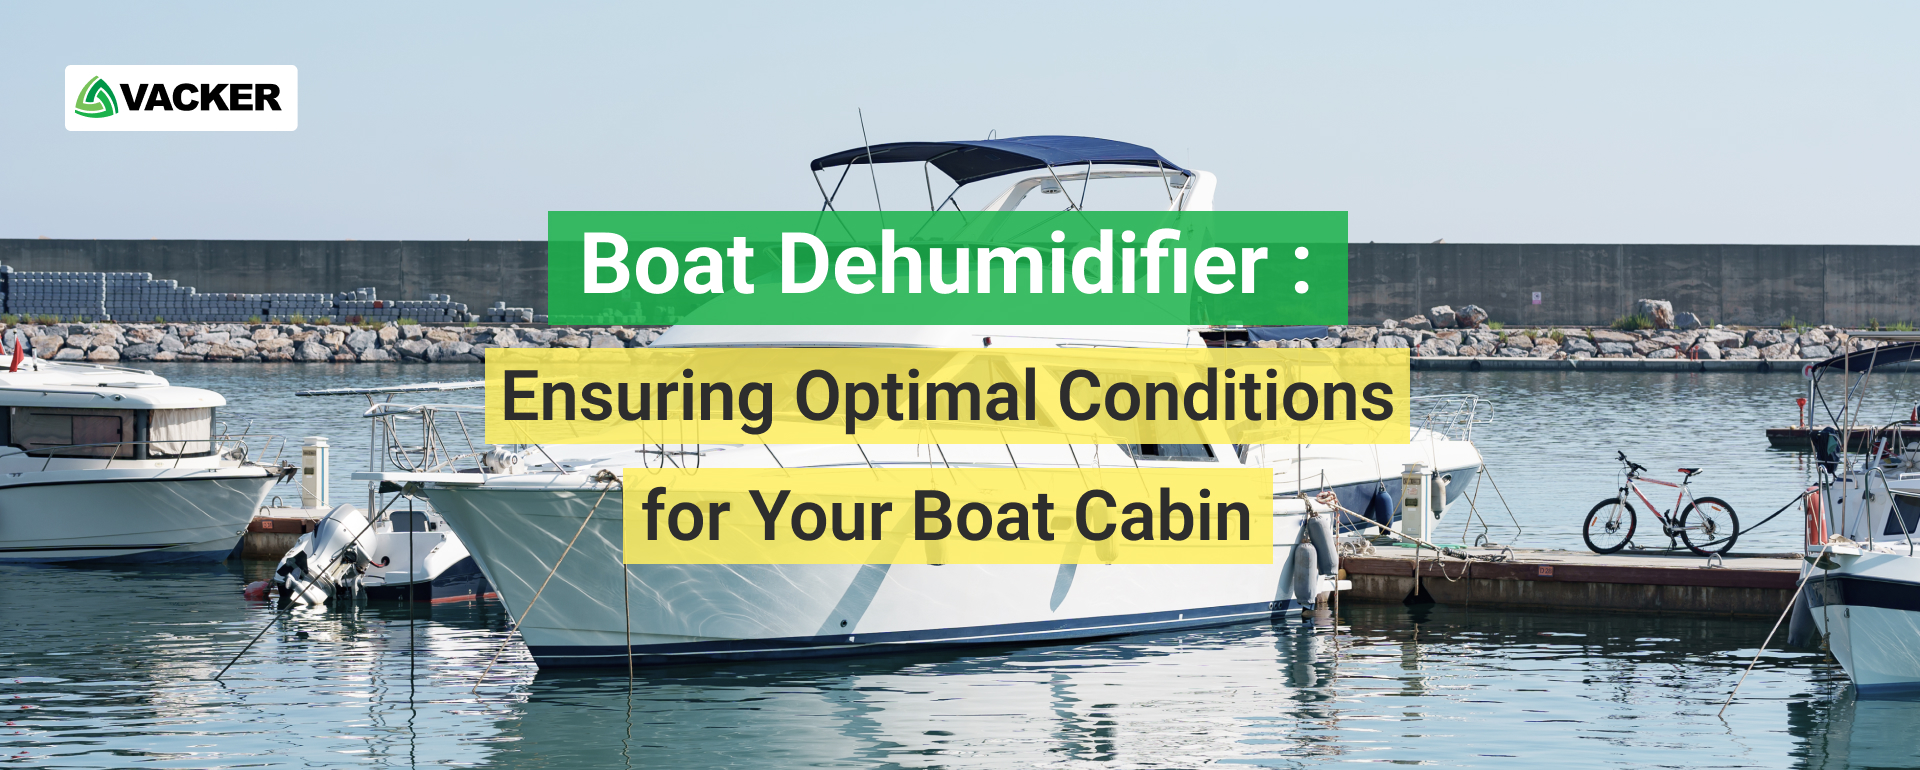 Boat Dehumidifier : Ensuring Optimal Conditions for Your Boat Cabin